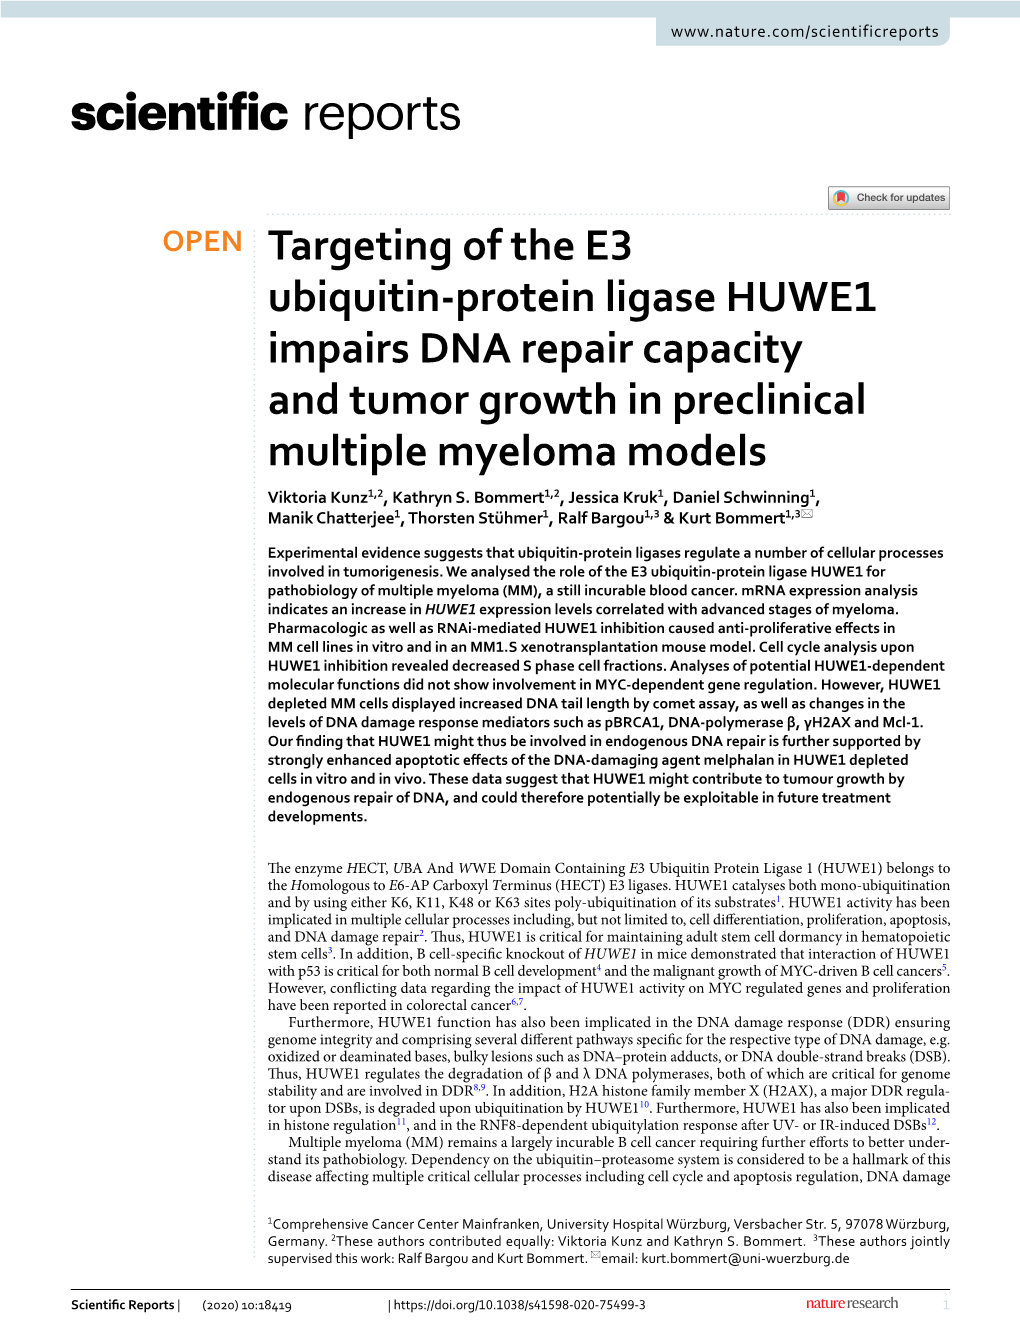 Targeting of the E3 Ubiquitin-Protein Ligase HUWE1 Impairs DNA Repair